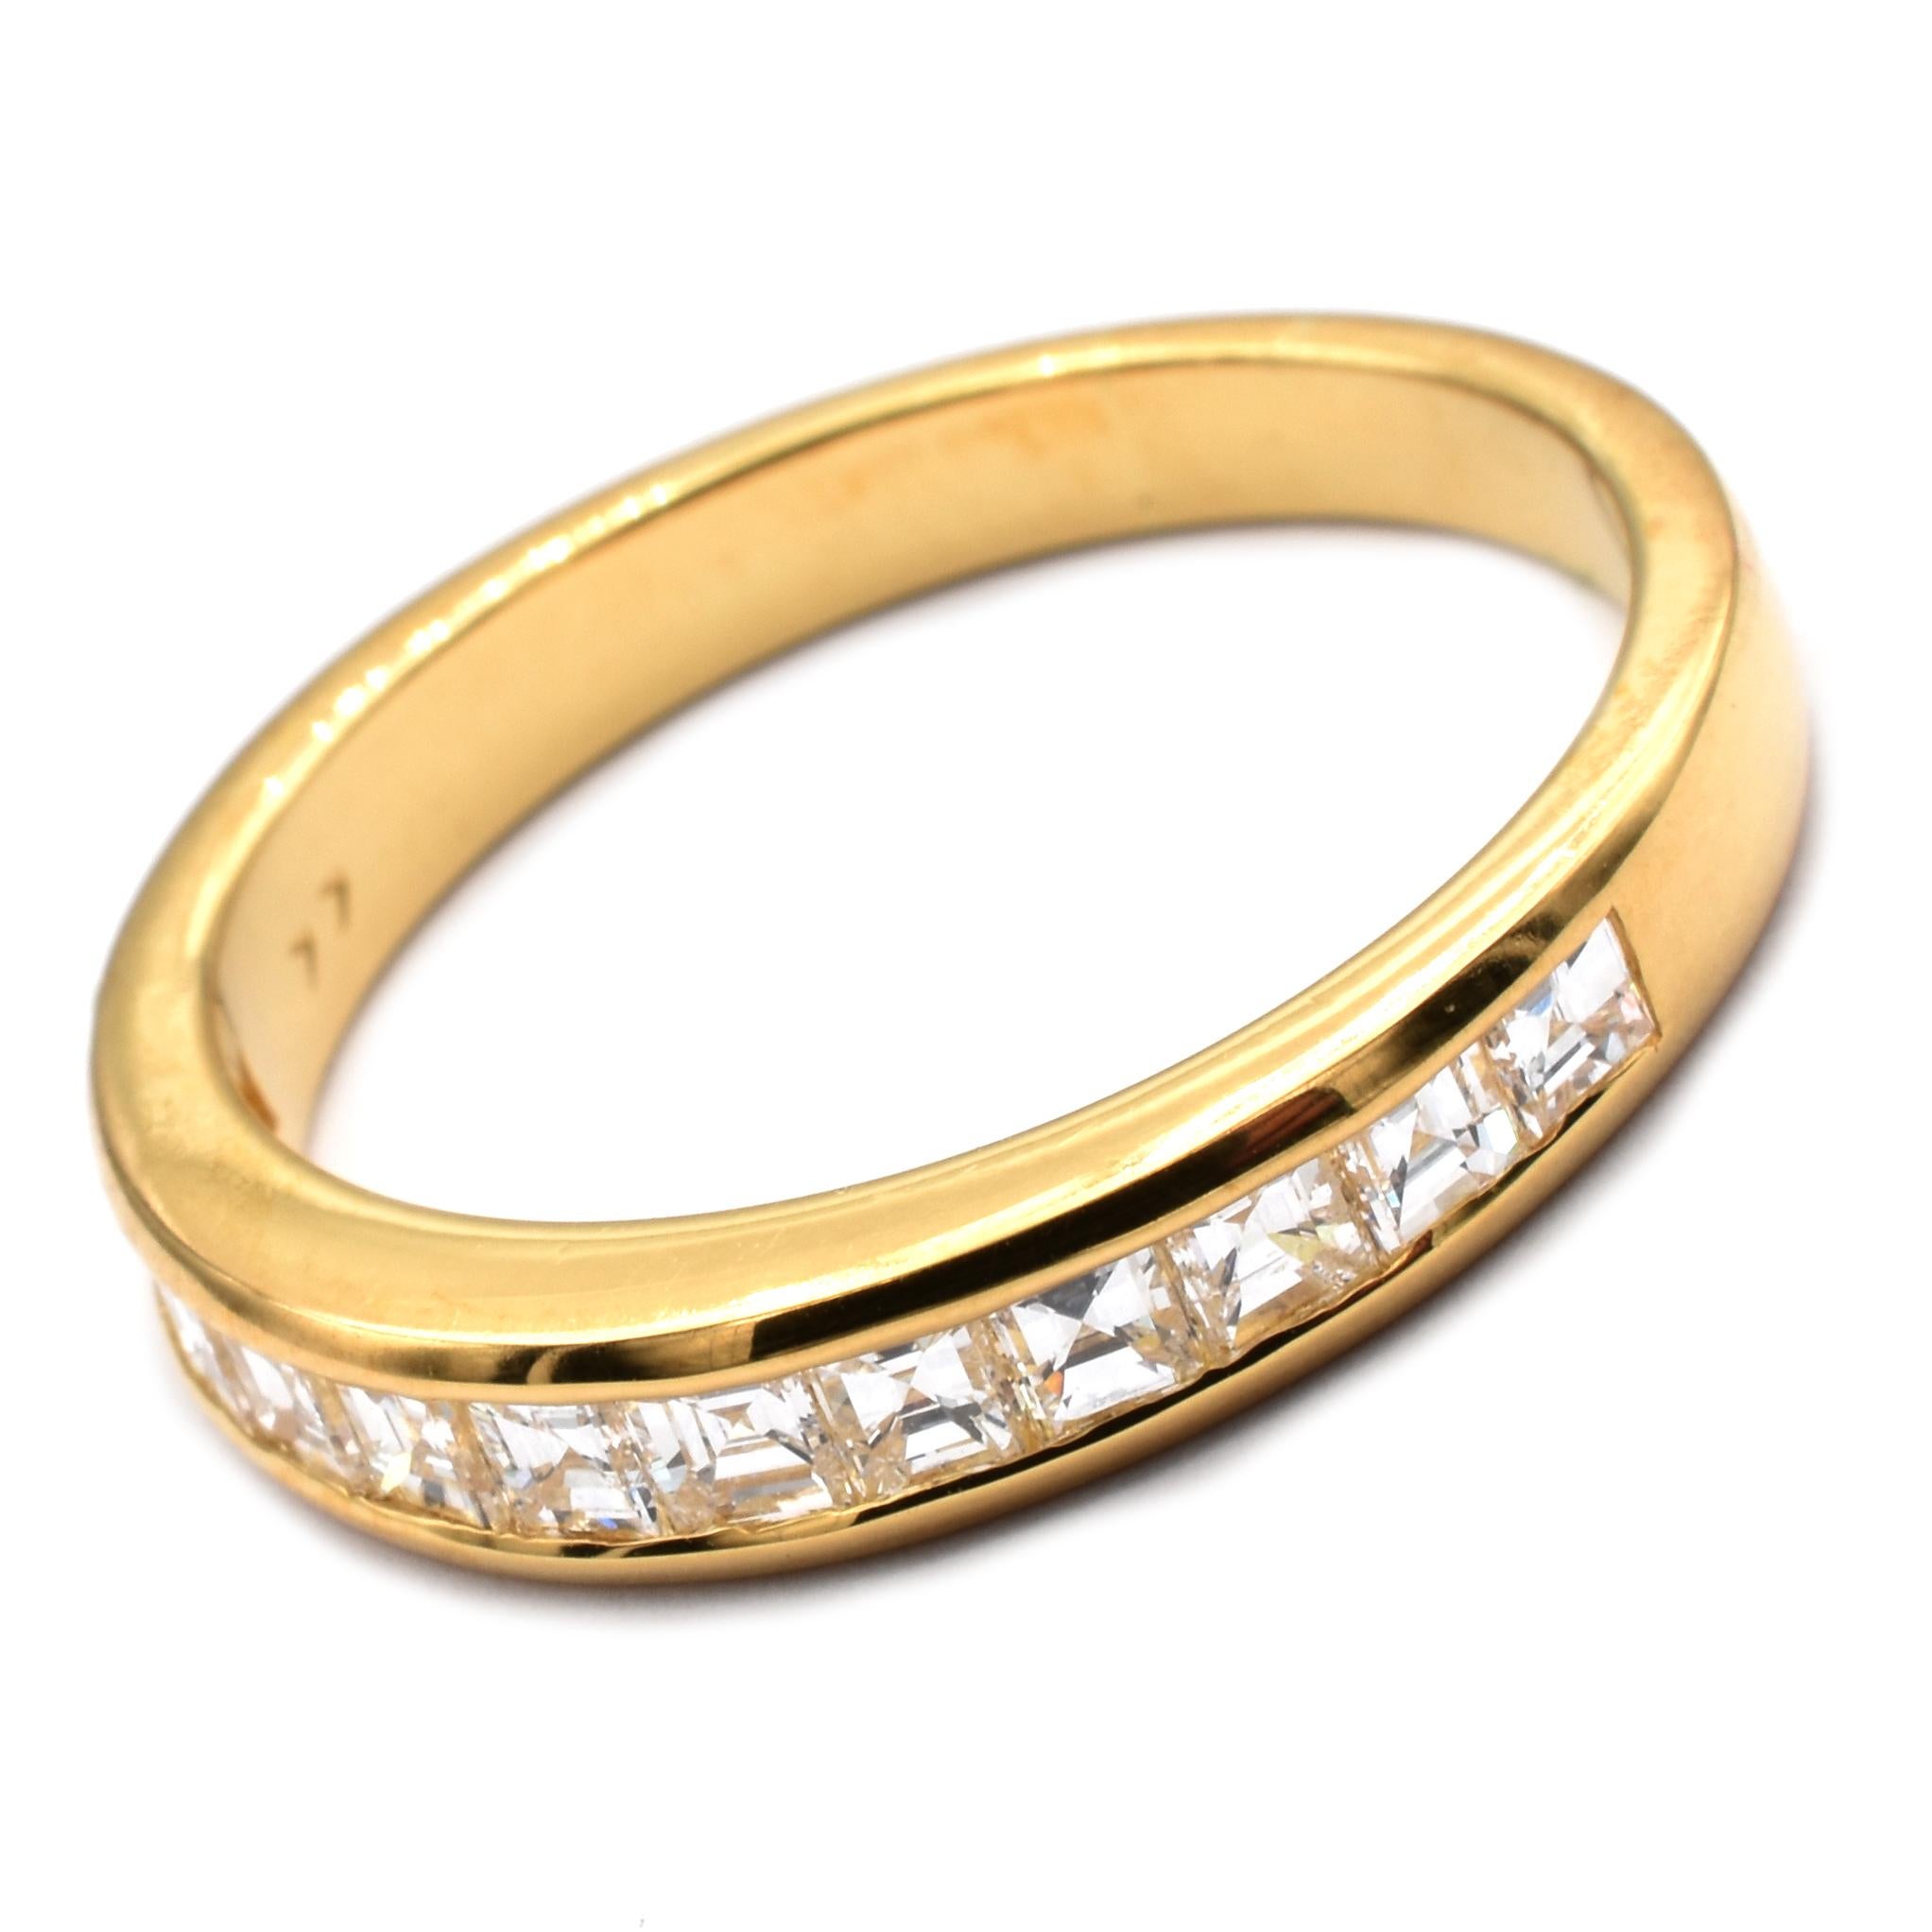 Gilberto Cassola Square Cut Diamonds Yellow Gold Ring Made in Italy In New Condition For Sale In Valenza, AL